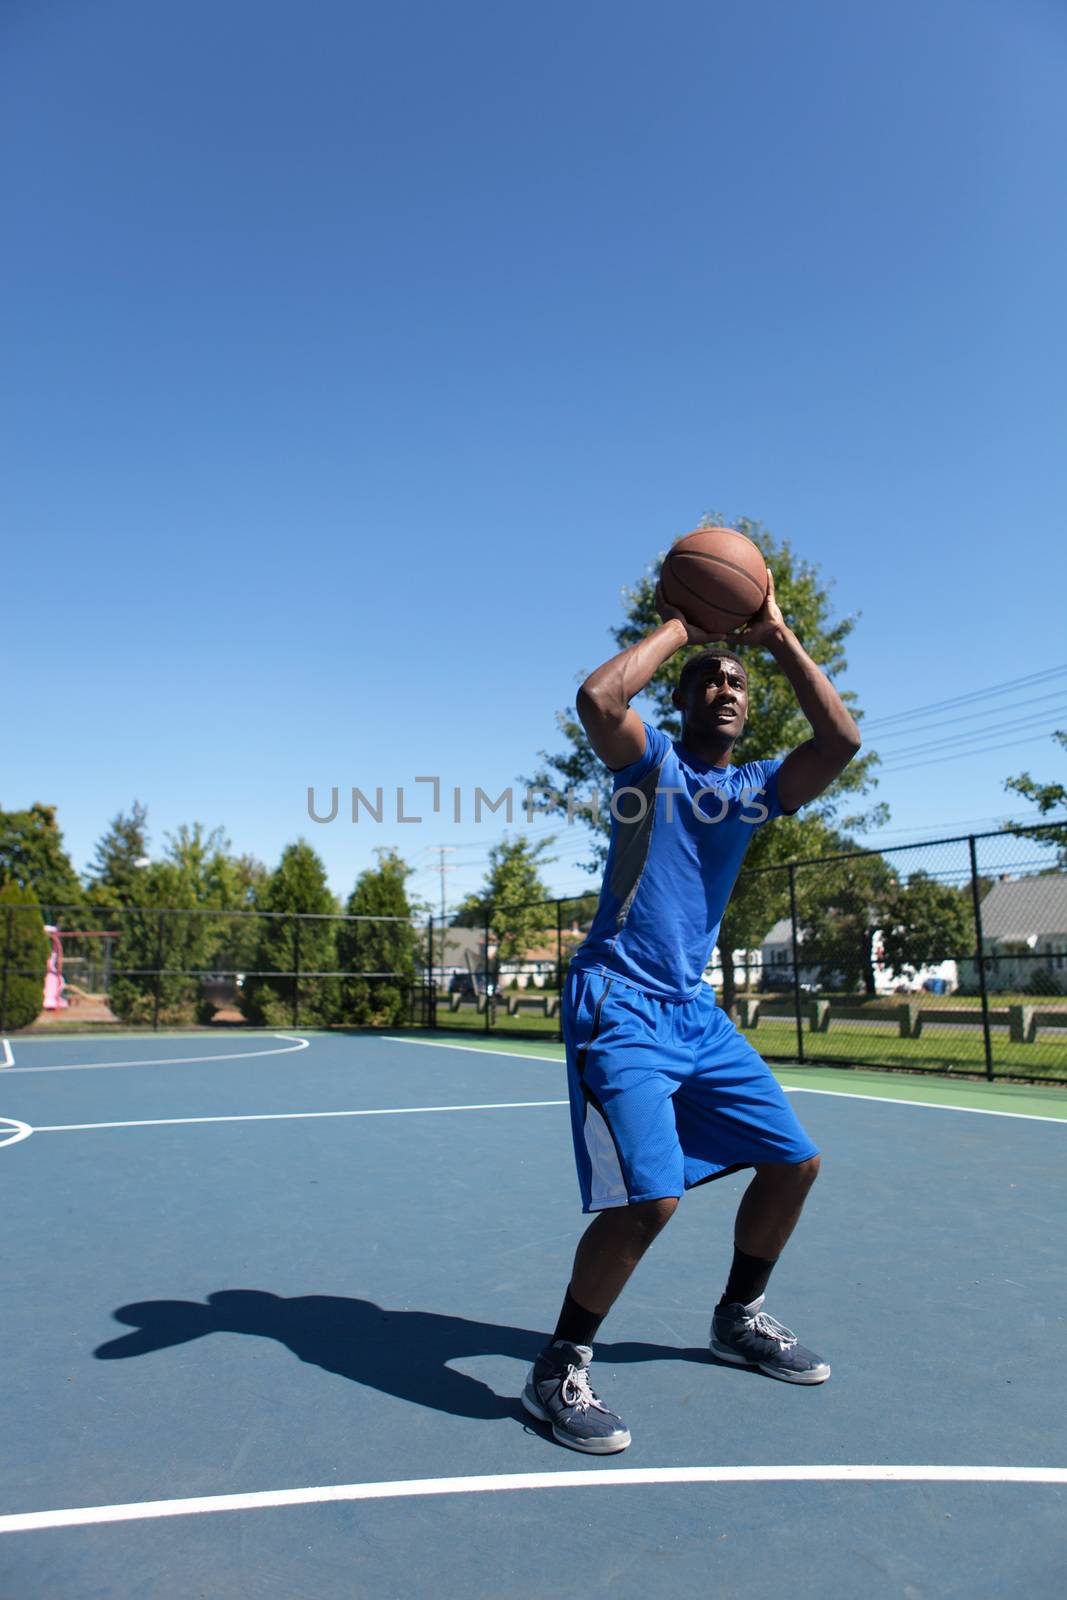 Young basketball player in his early twenties shooting the ball on an outdoor court.